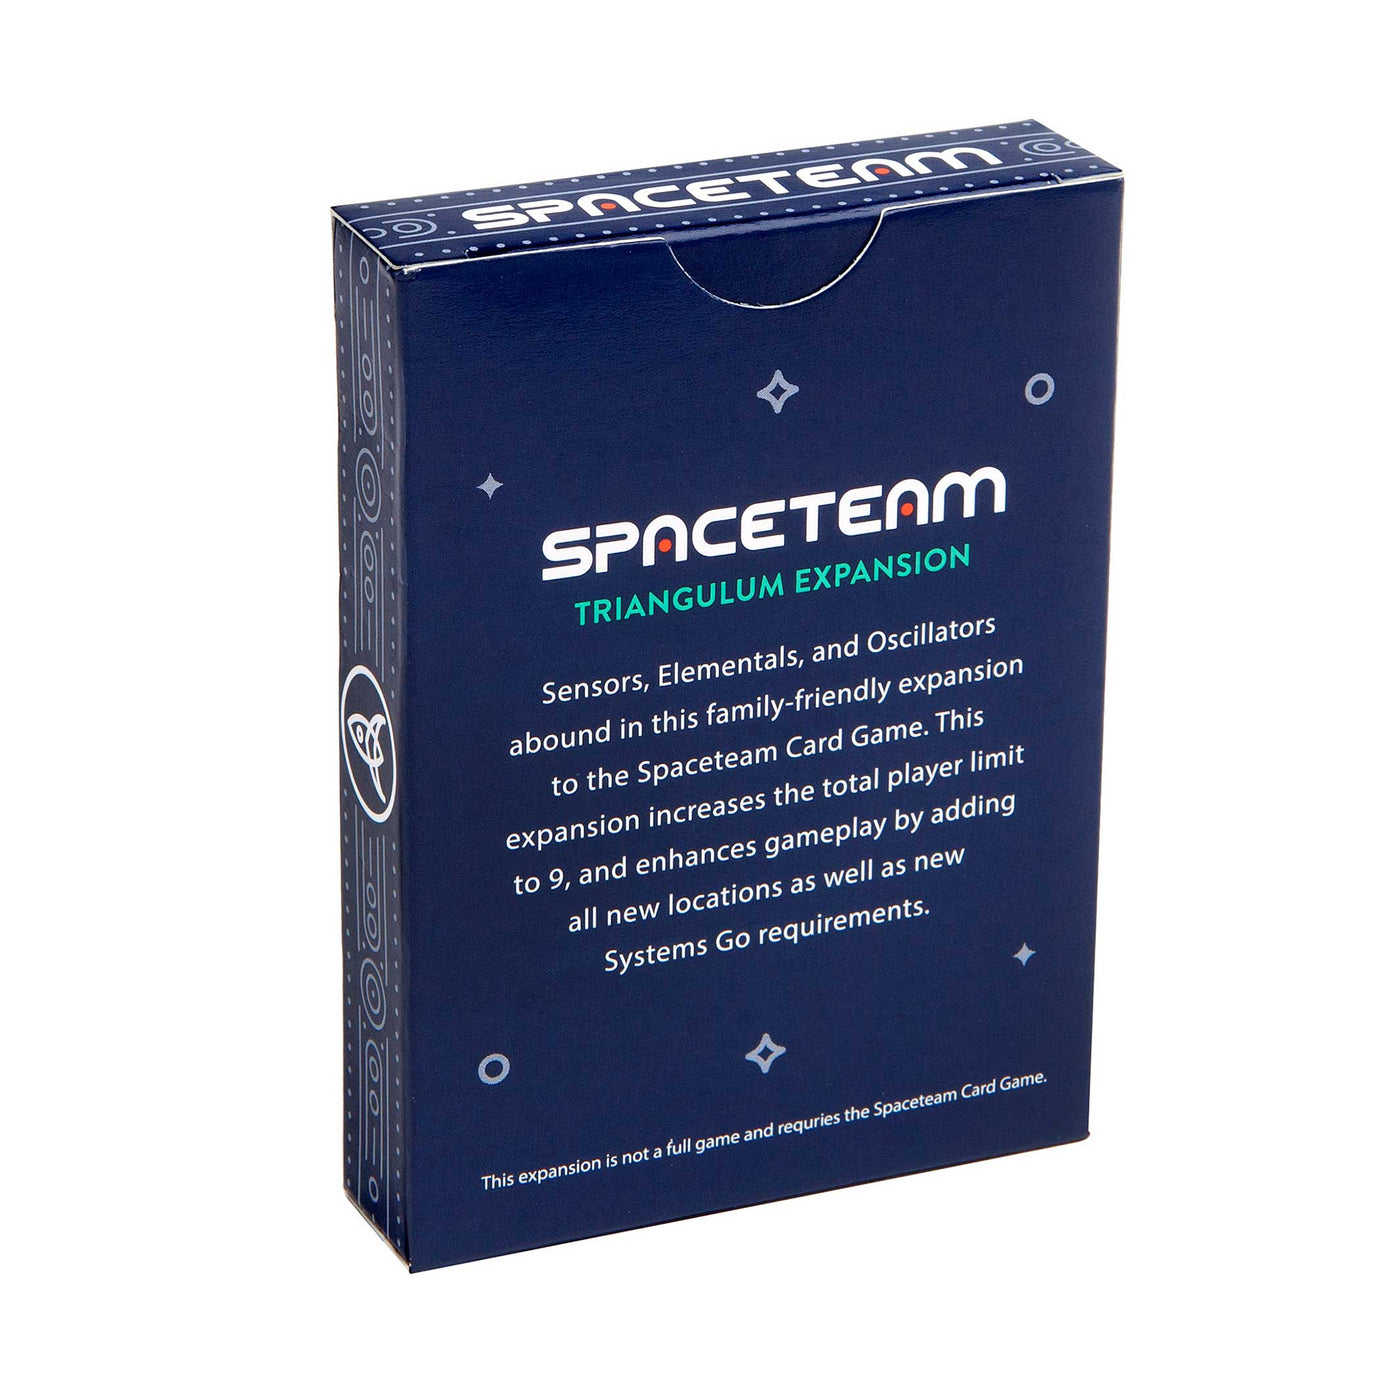 Back of Packaging for Spaceteam game's Triangulum Expansion 